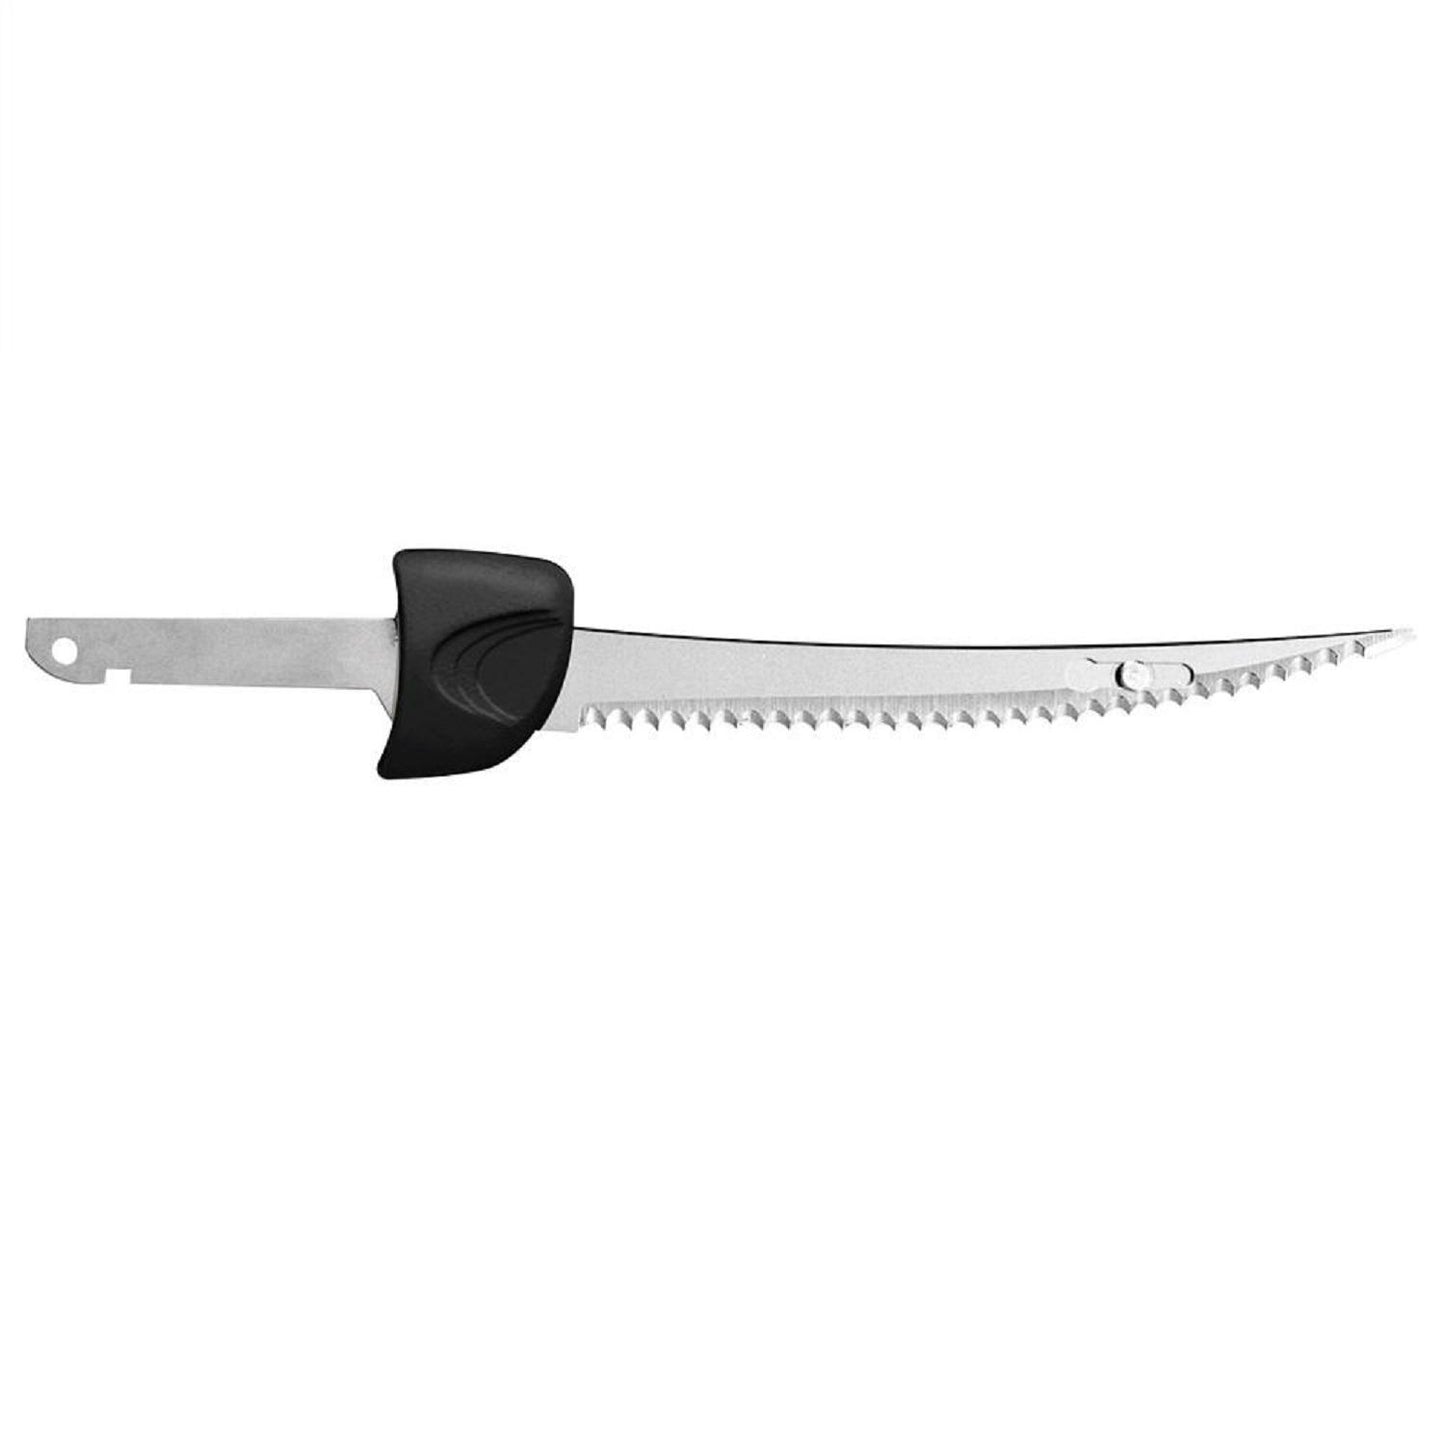 American Angler AEB-KB-DS-001-4 5.5" Panfish Electric Knife Blade